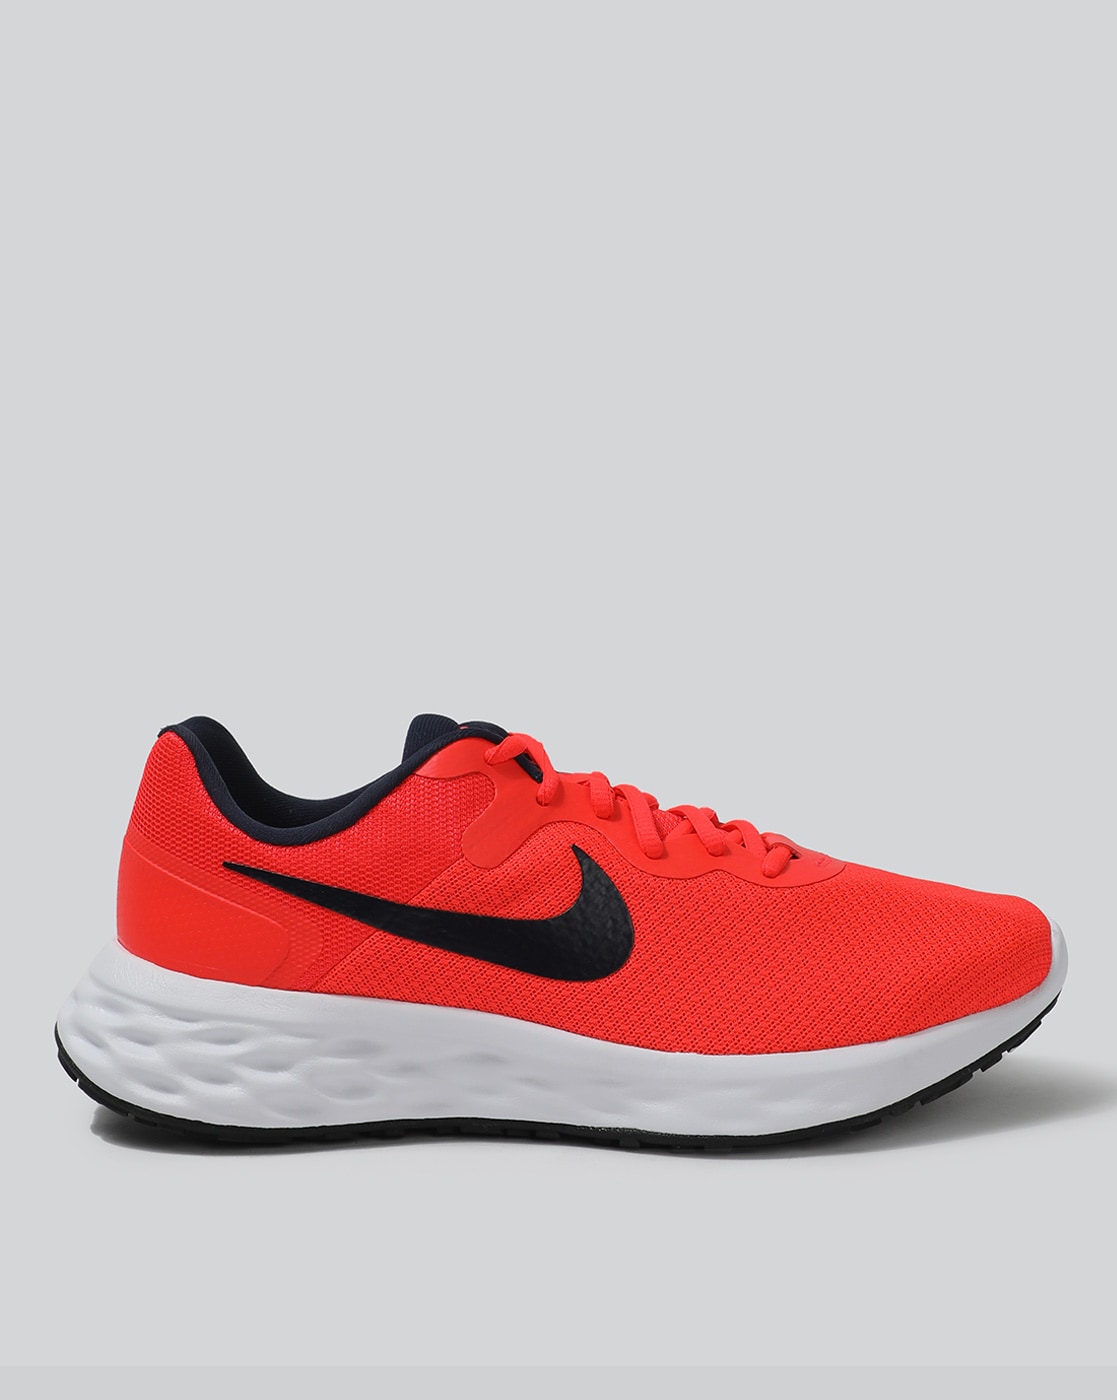 Find the Best NIKE Tennis Shoes for you! - YouTube